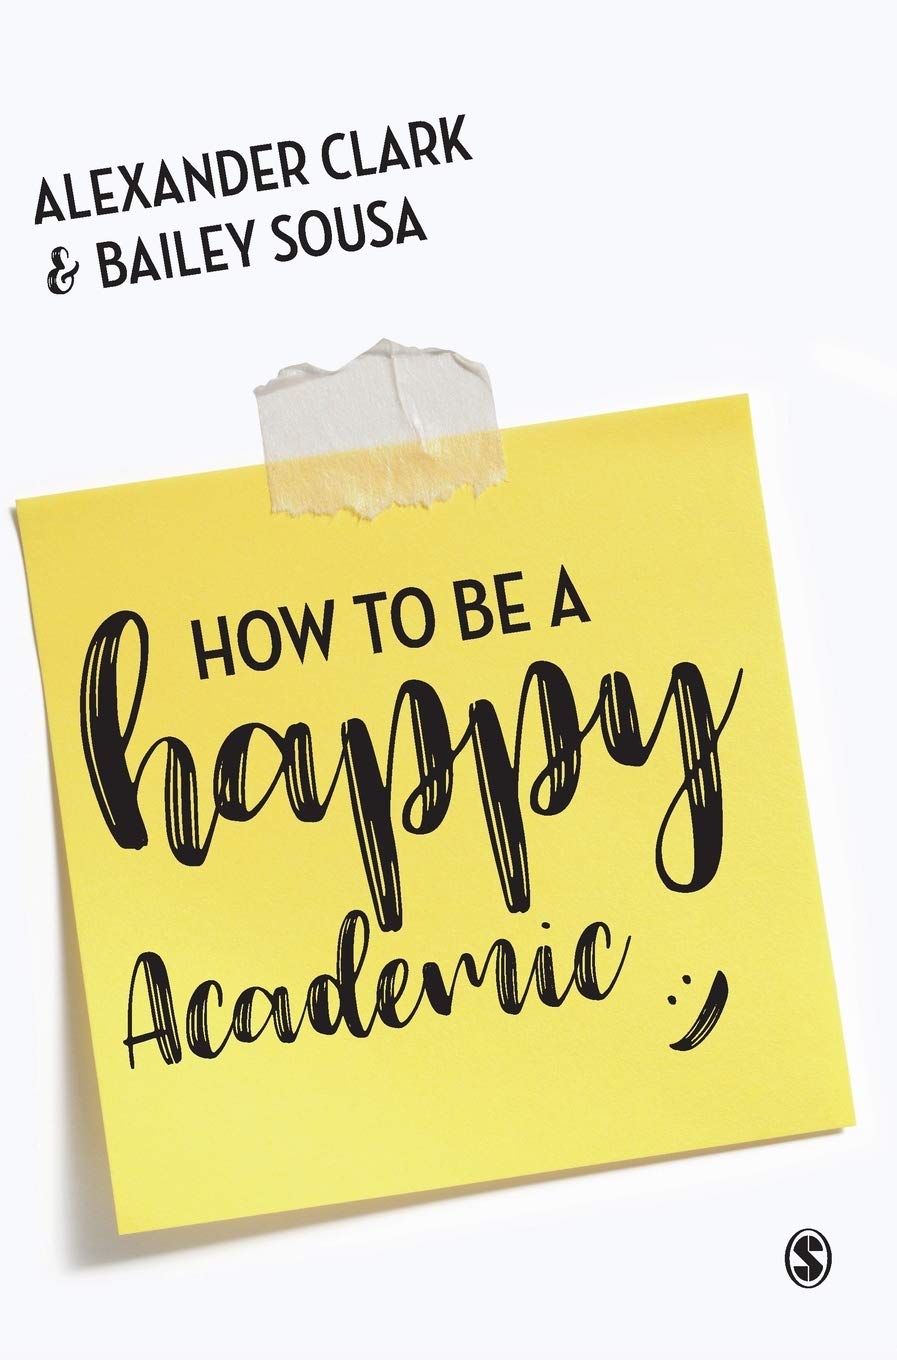 How to Be a Happy Academic